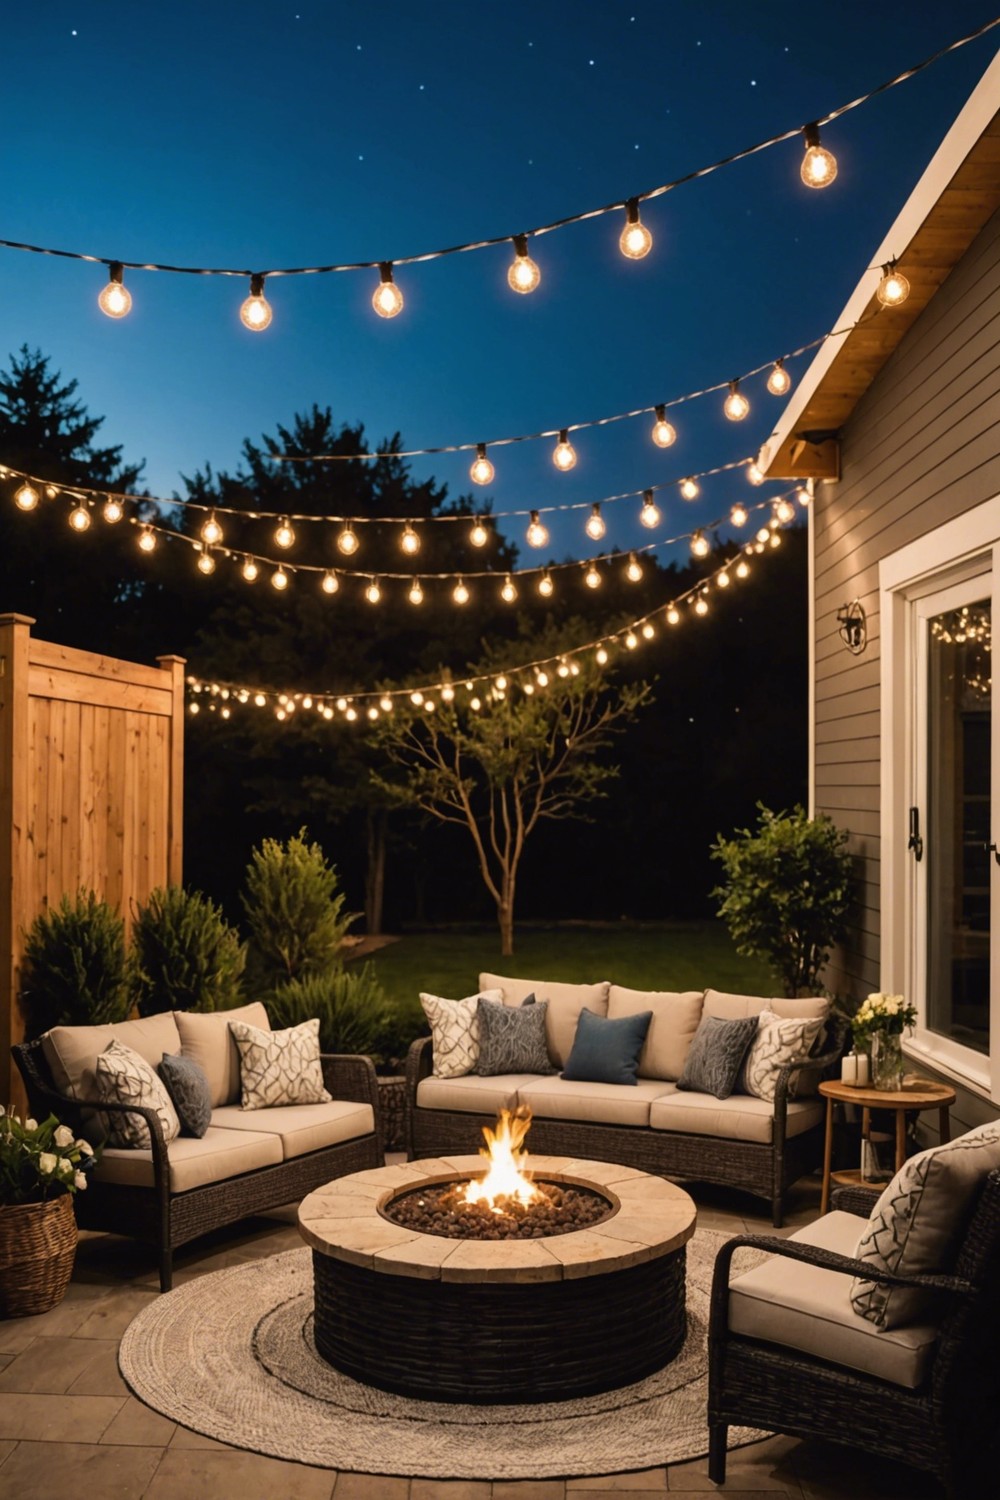 Fire Pit Seating for Chilly Nights